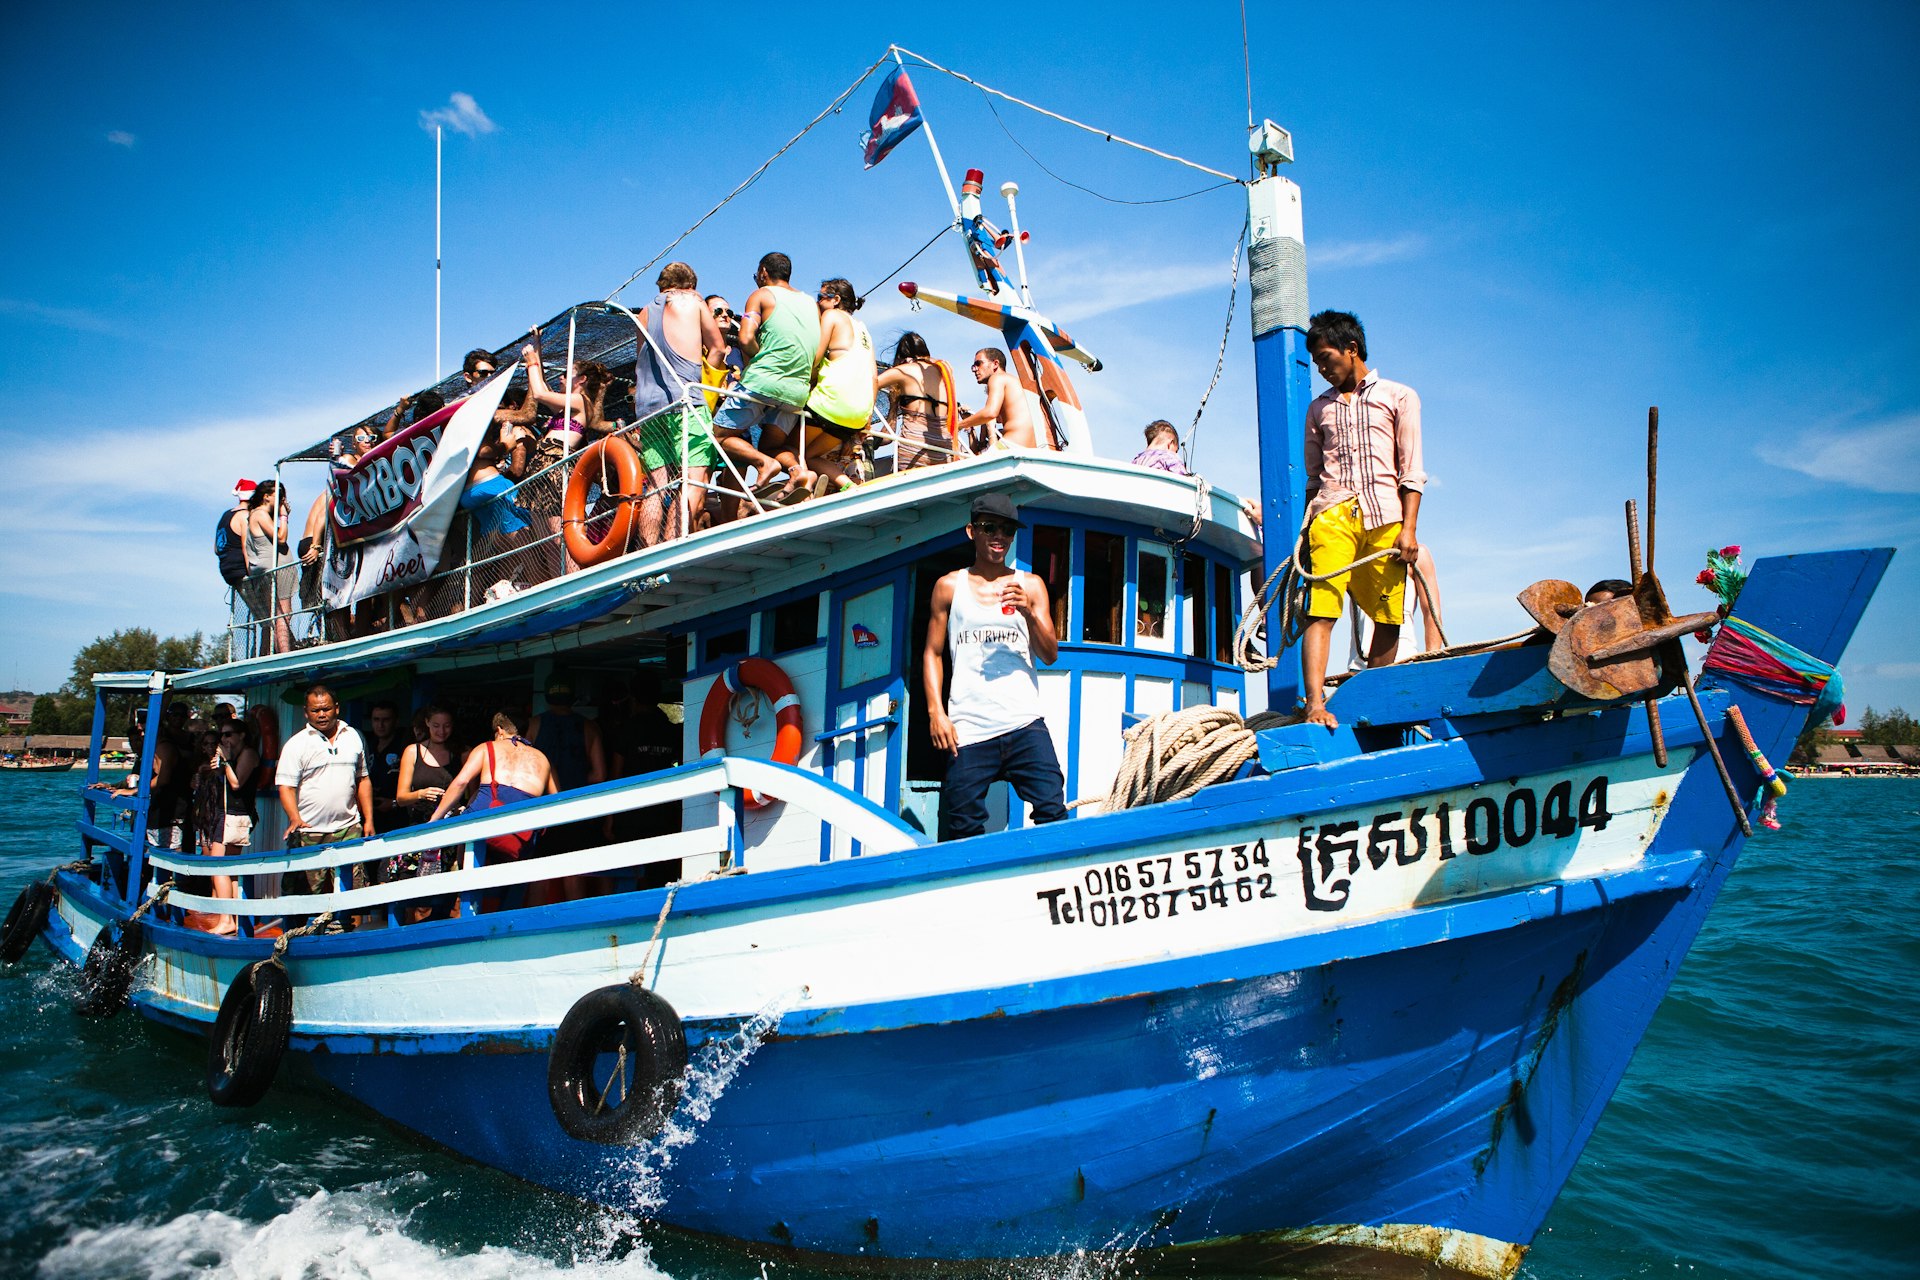 A party cruise takes backpackers out to swim and party in Koh Rong, Cambodia